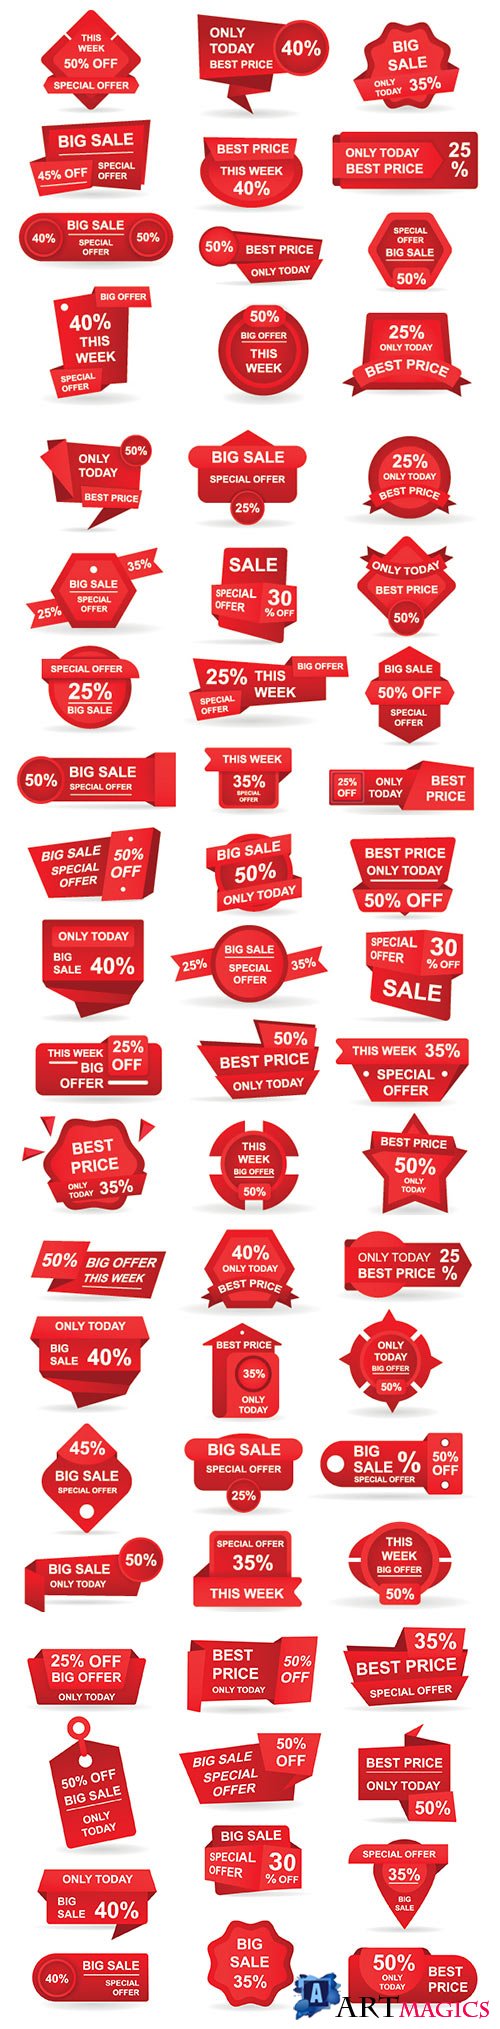 Stickers best offer price and big sale pricing 